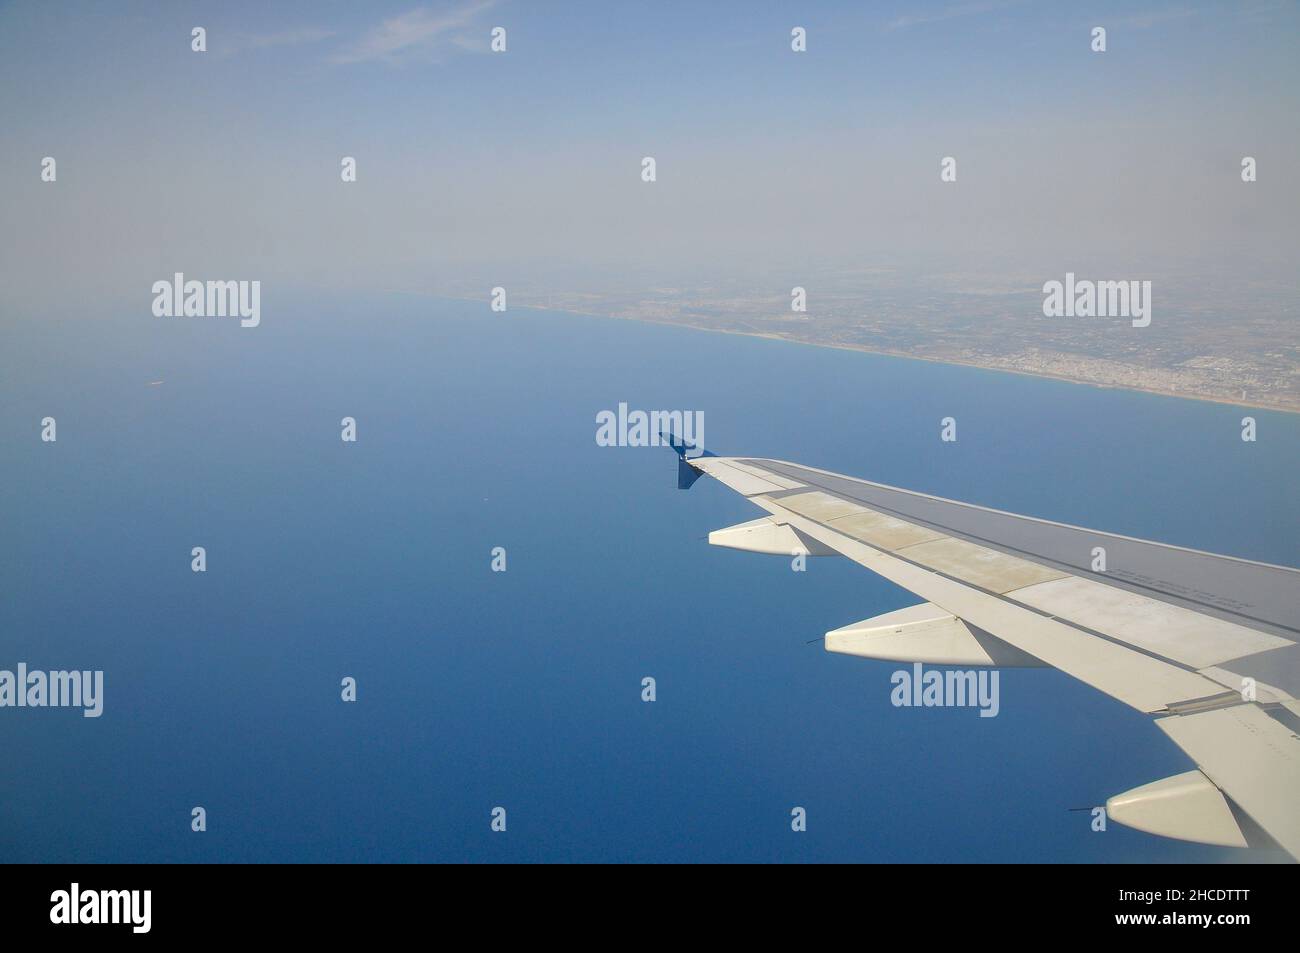 Elevated view of the Mediterranean Sea and clouds as seen through the window of an Airbus A320-200 plane Stock Photo